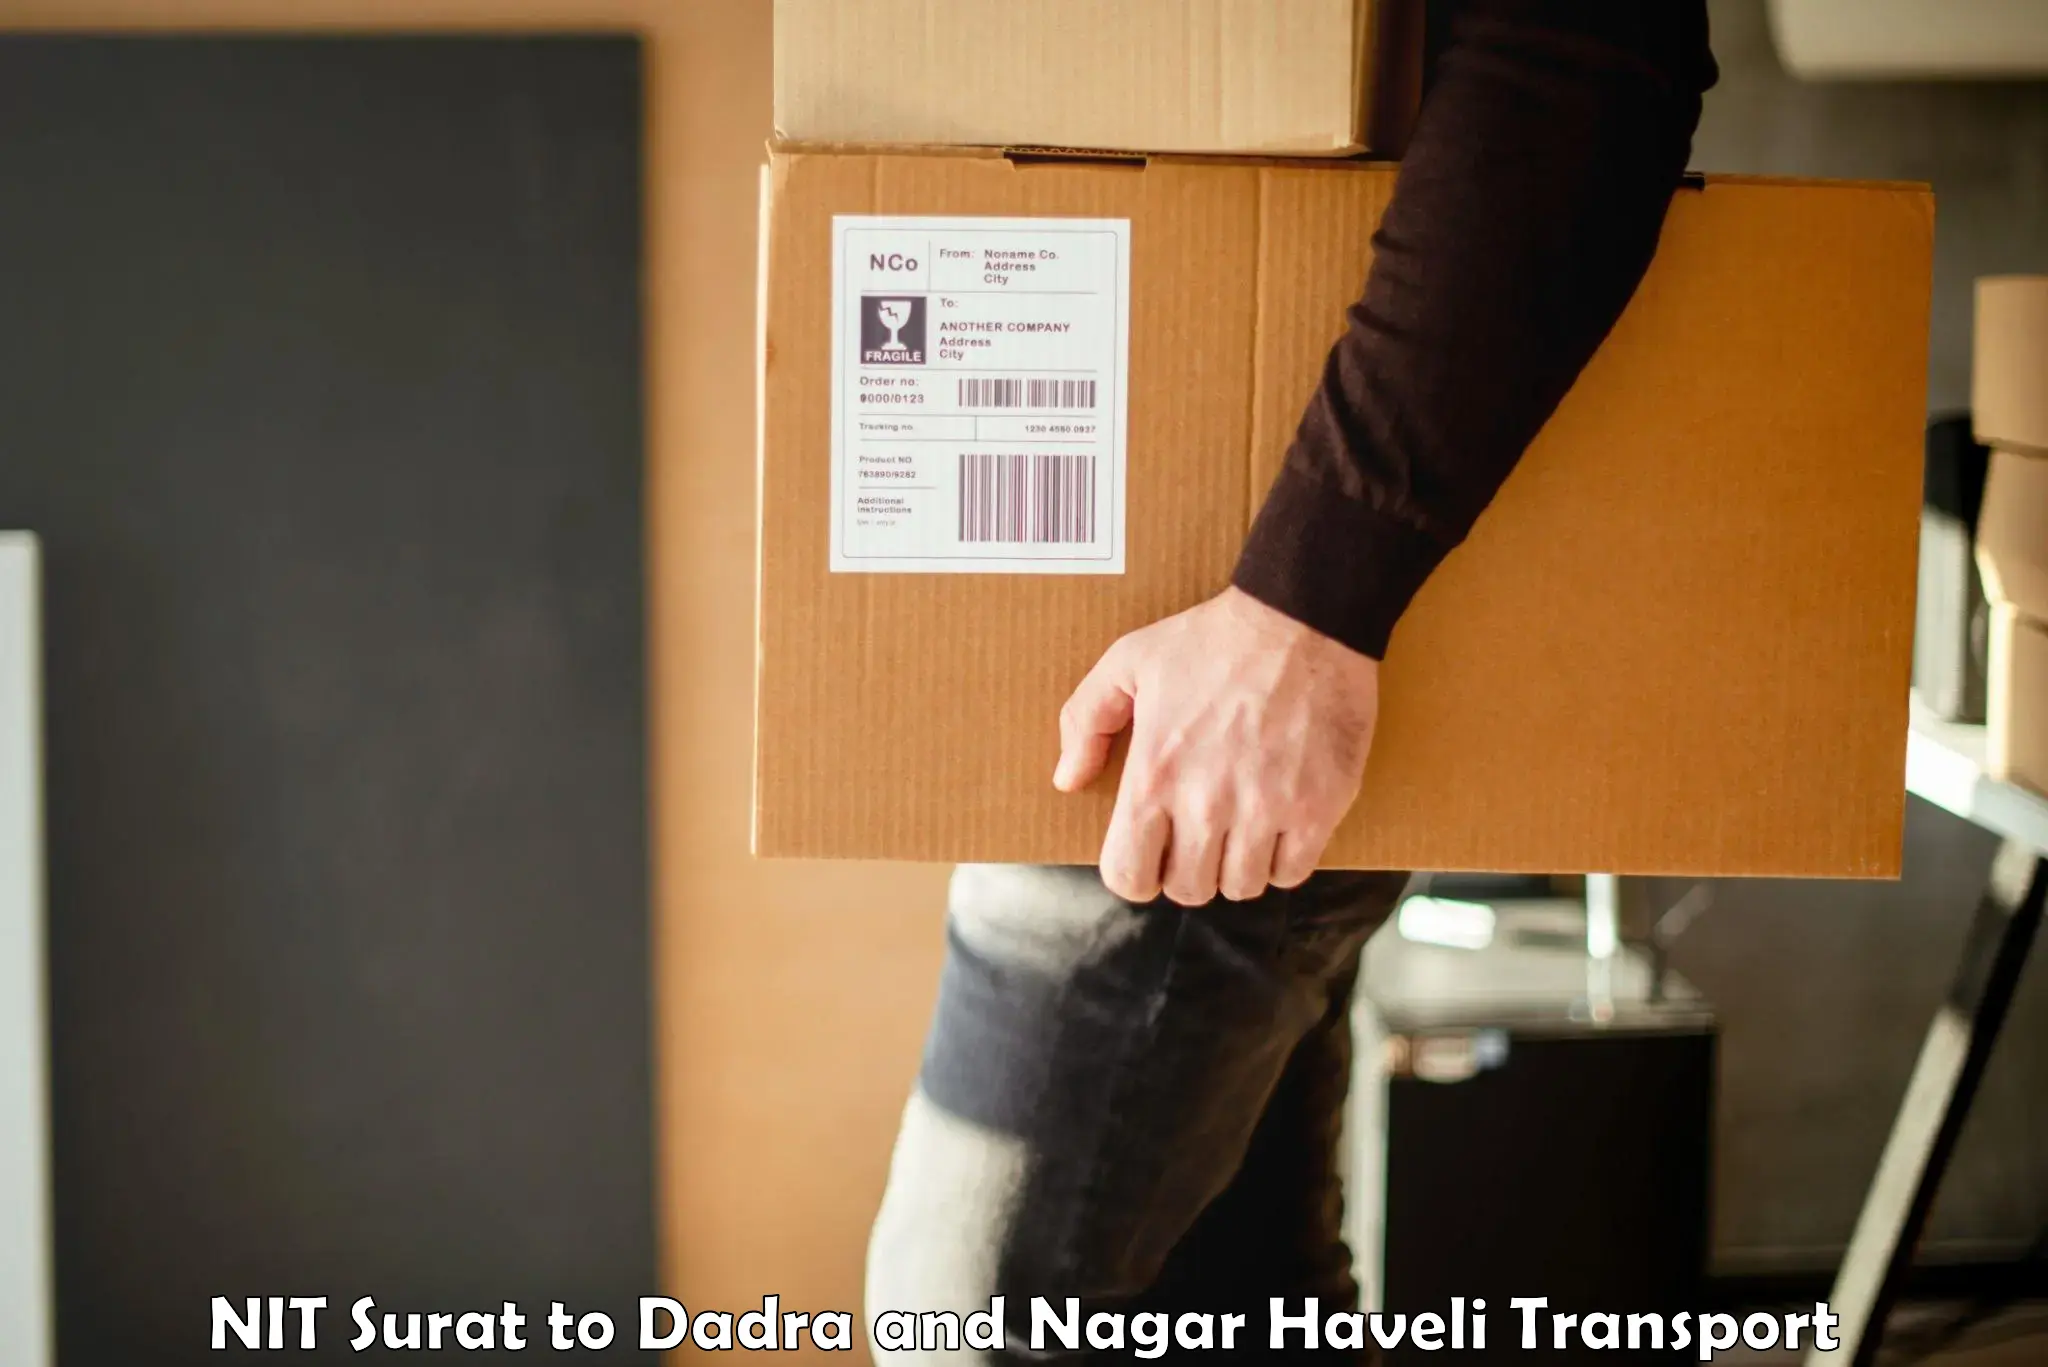 Daily parcel service transport NIT Surat to Dadra and Nagar Haveli